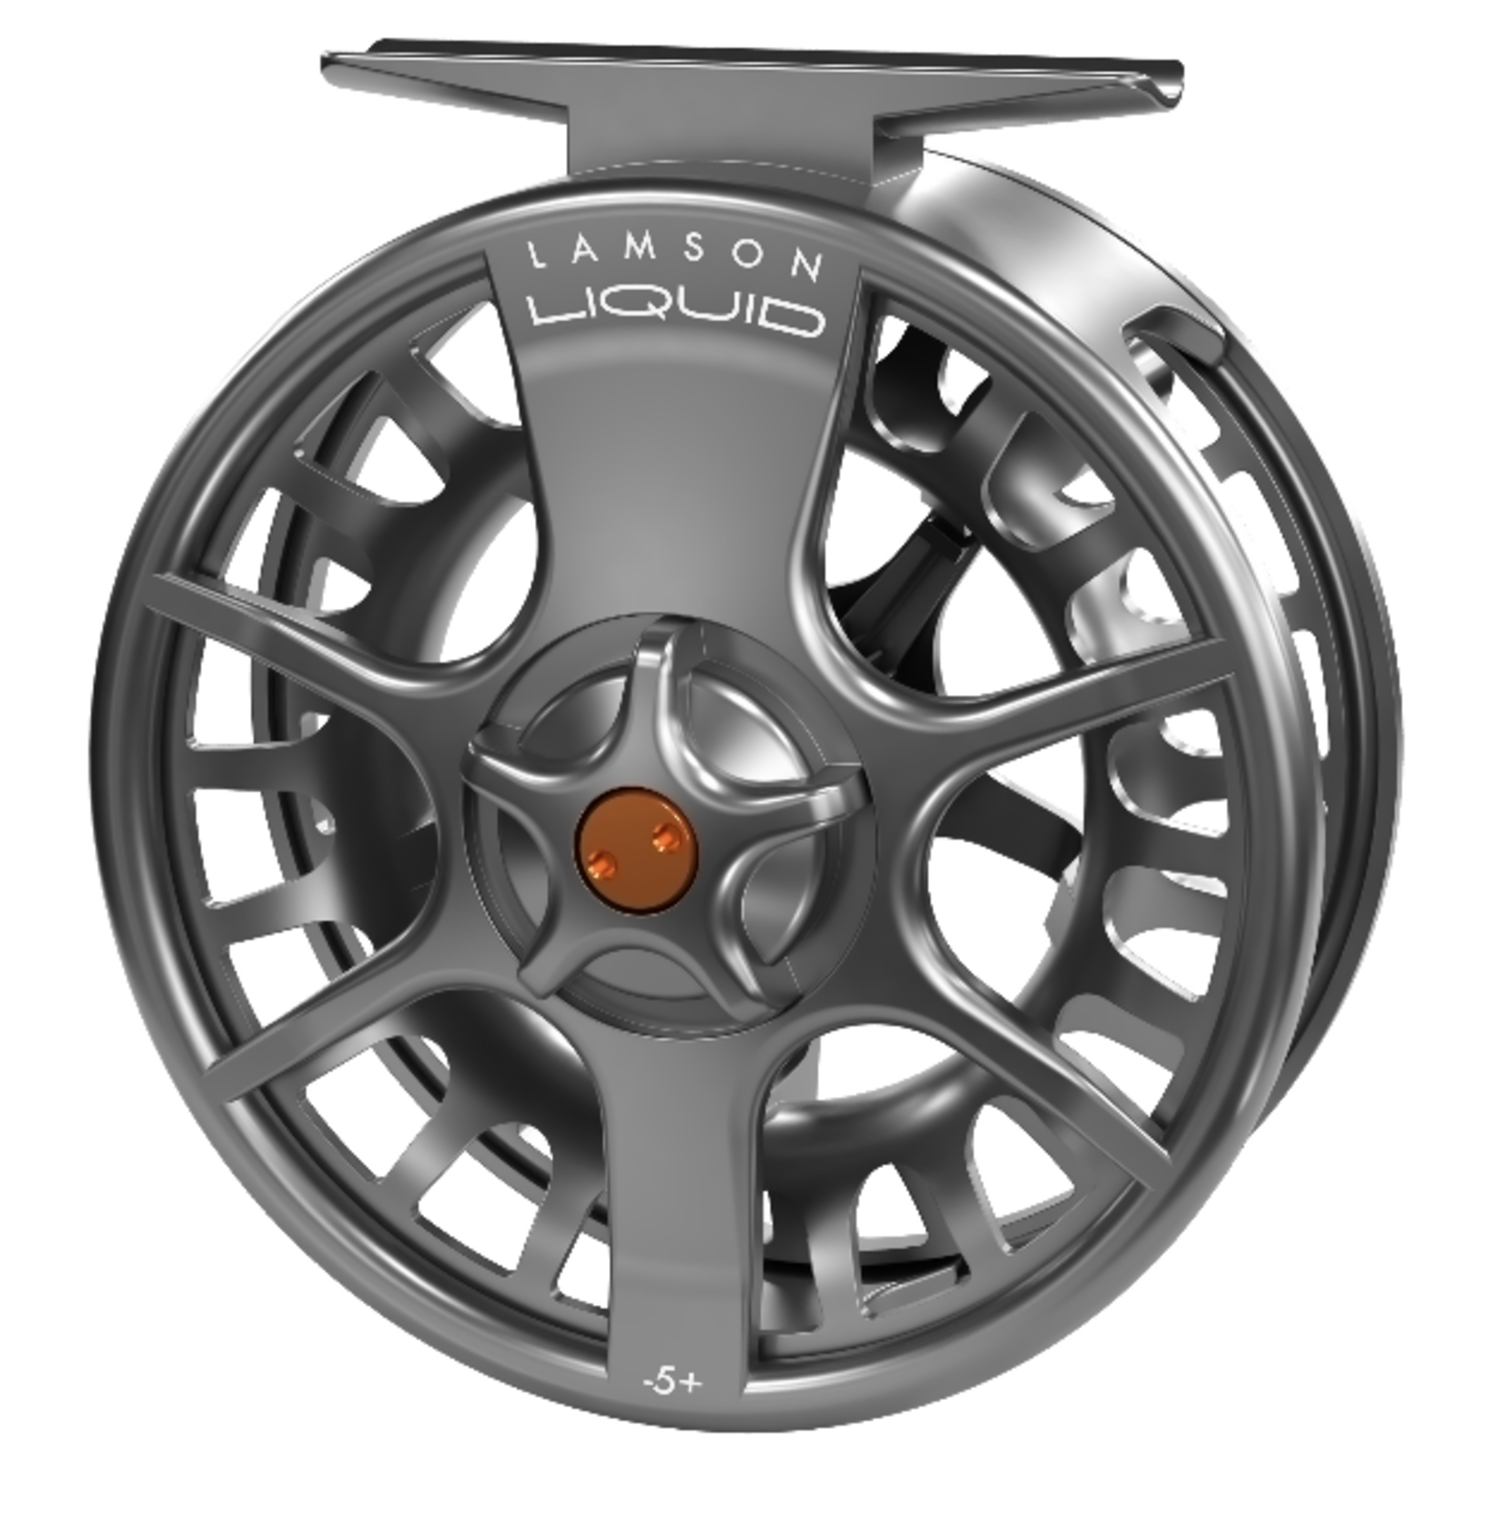 Lamson Liquid Max Fly Reel — The Flyfisher